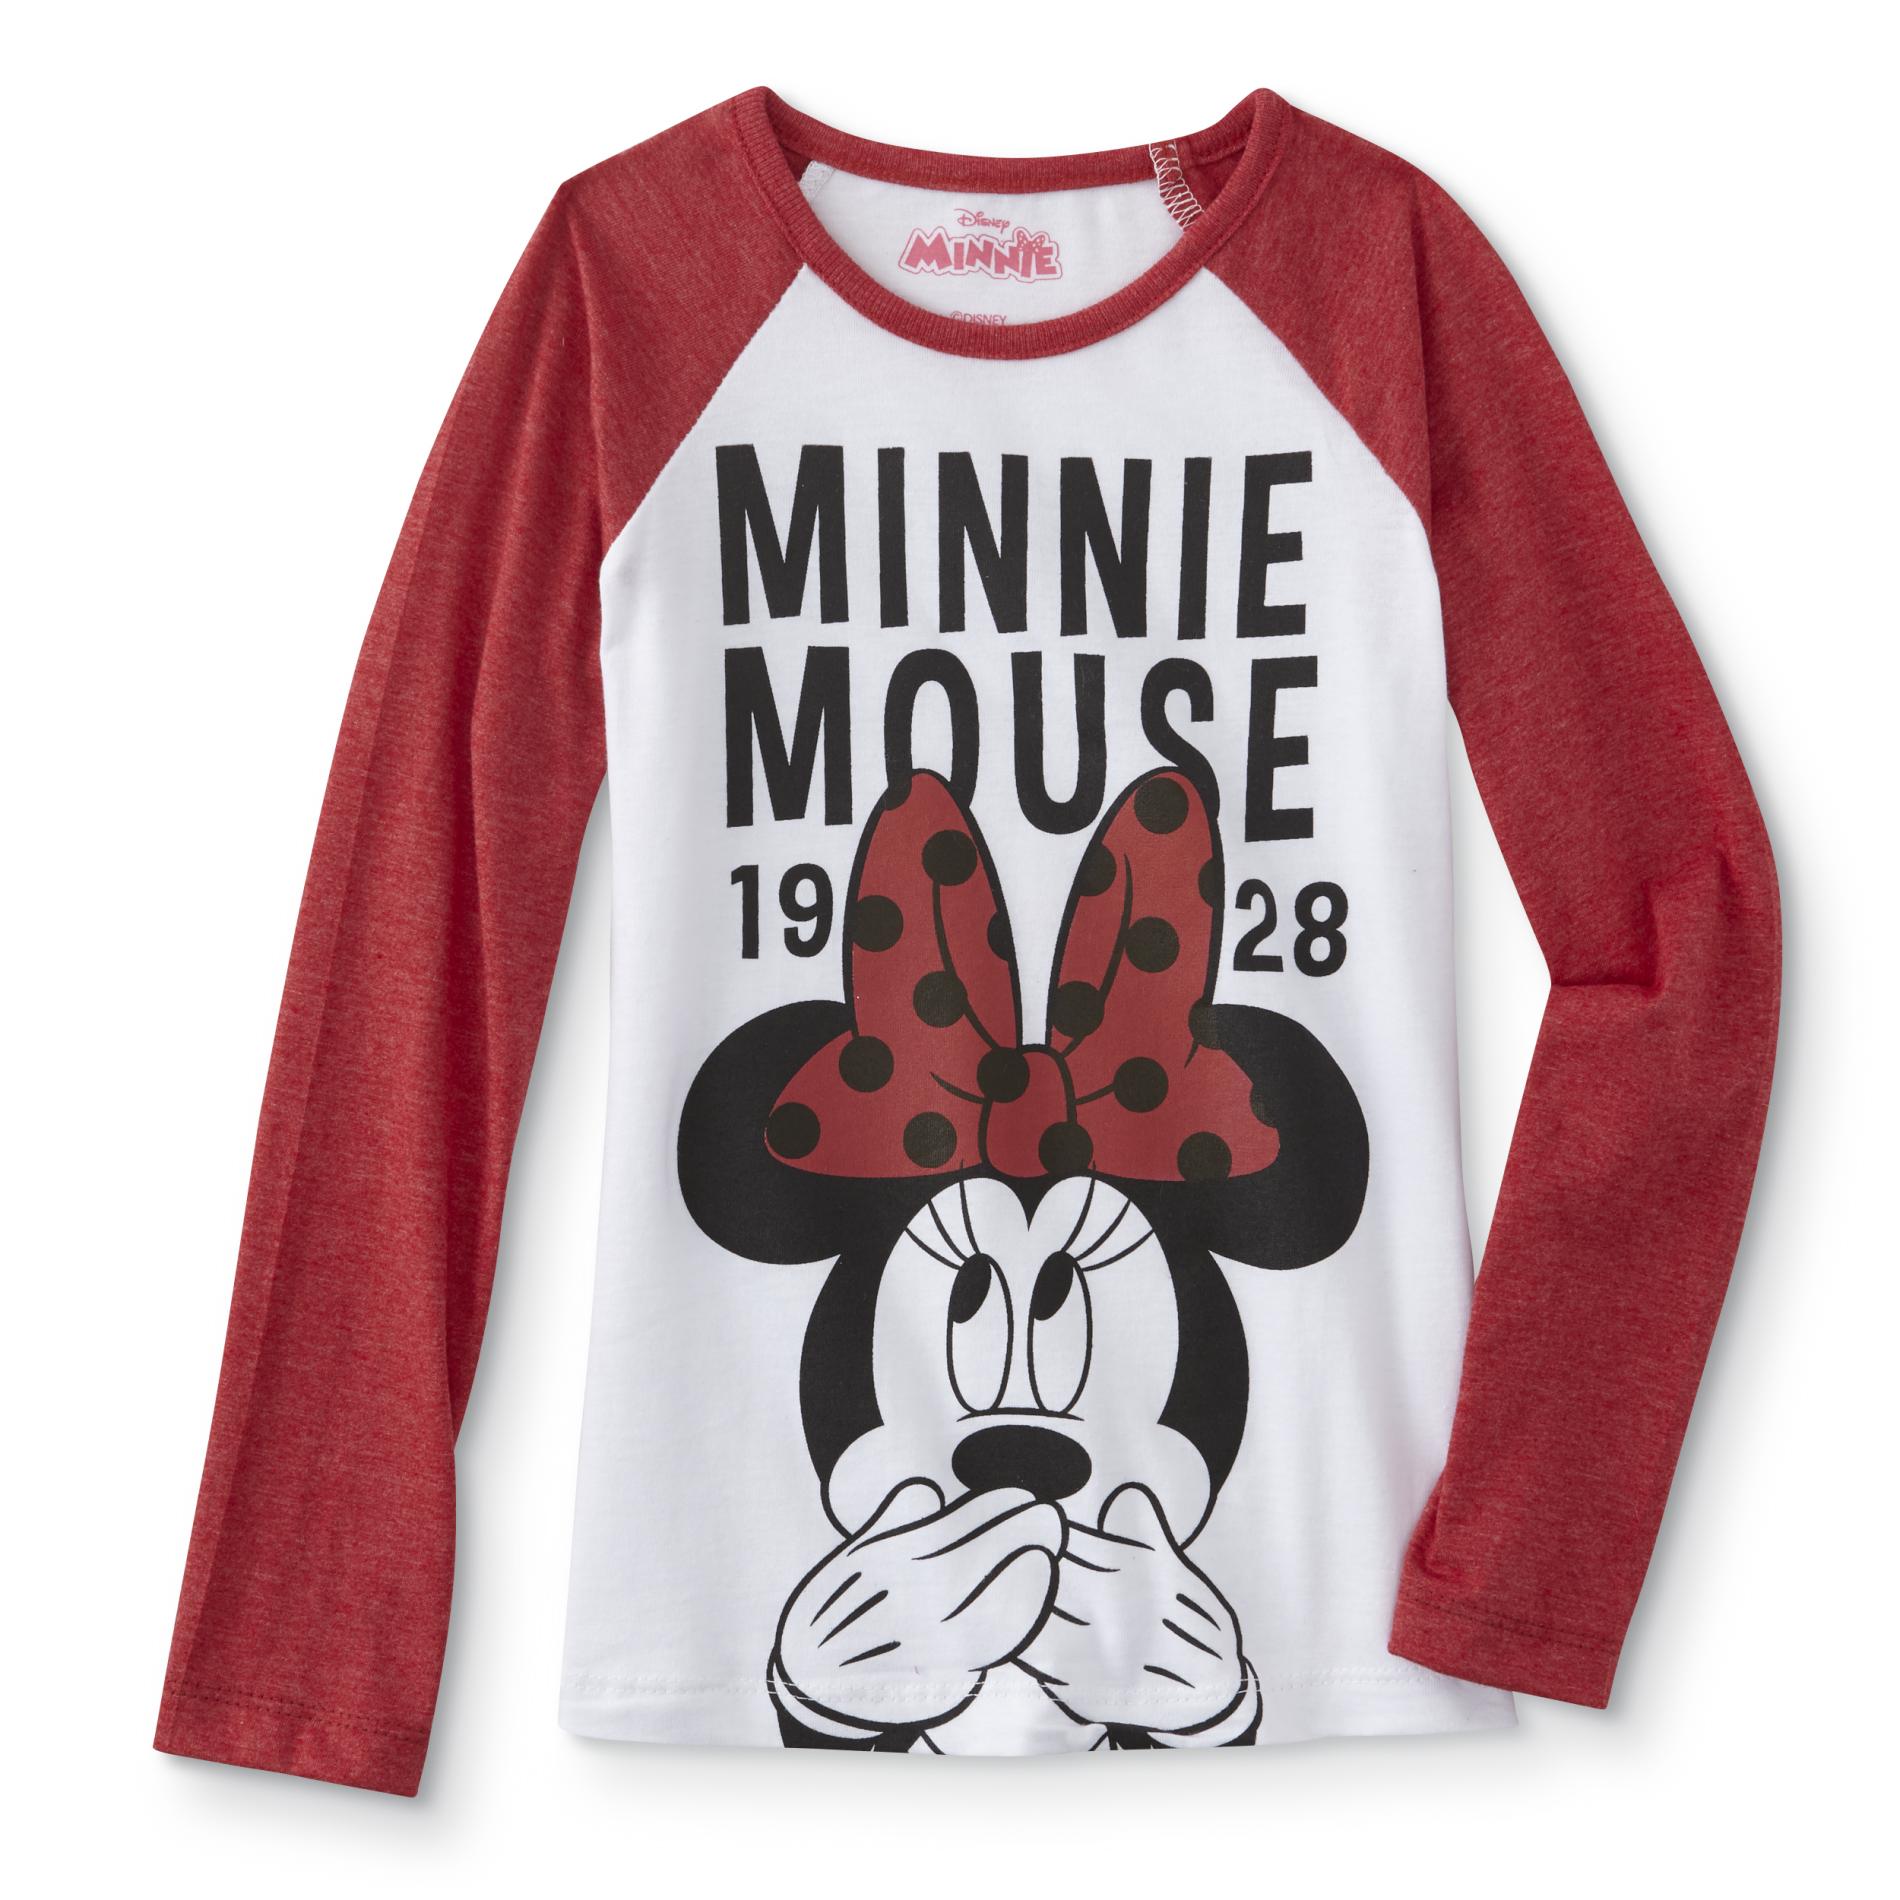 Children's Apparel Minnie Mouse Girls' Long-Sleeve Athletic T-Shirt - 1928